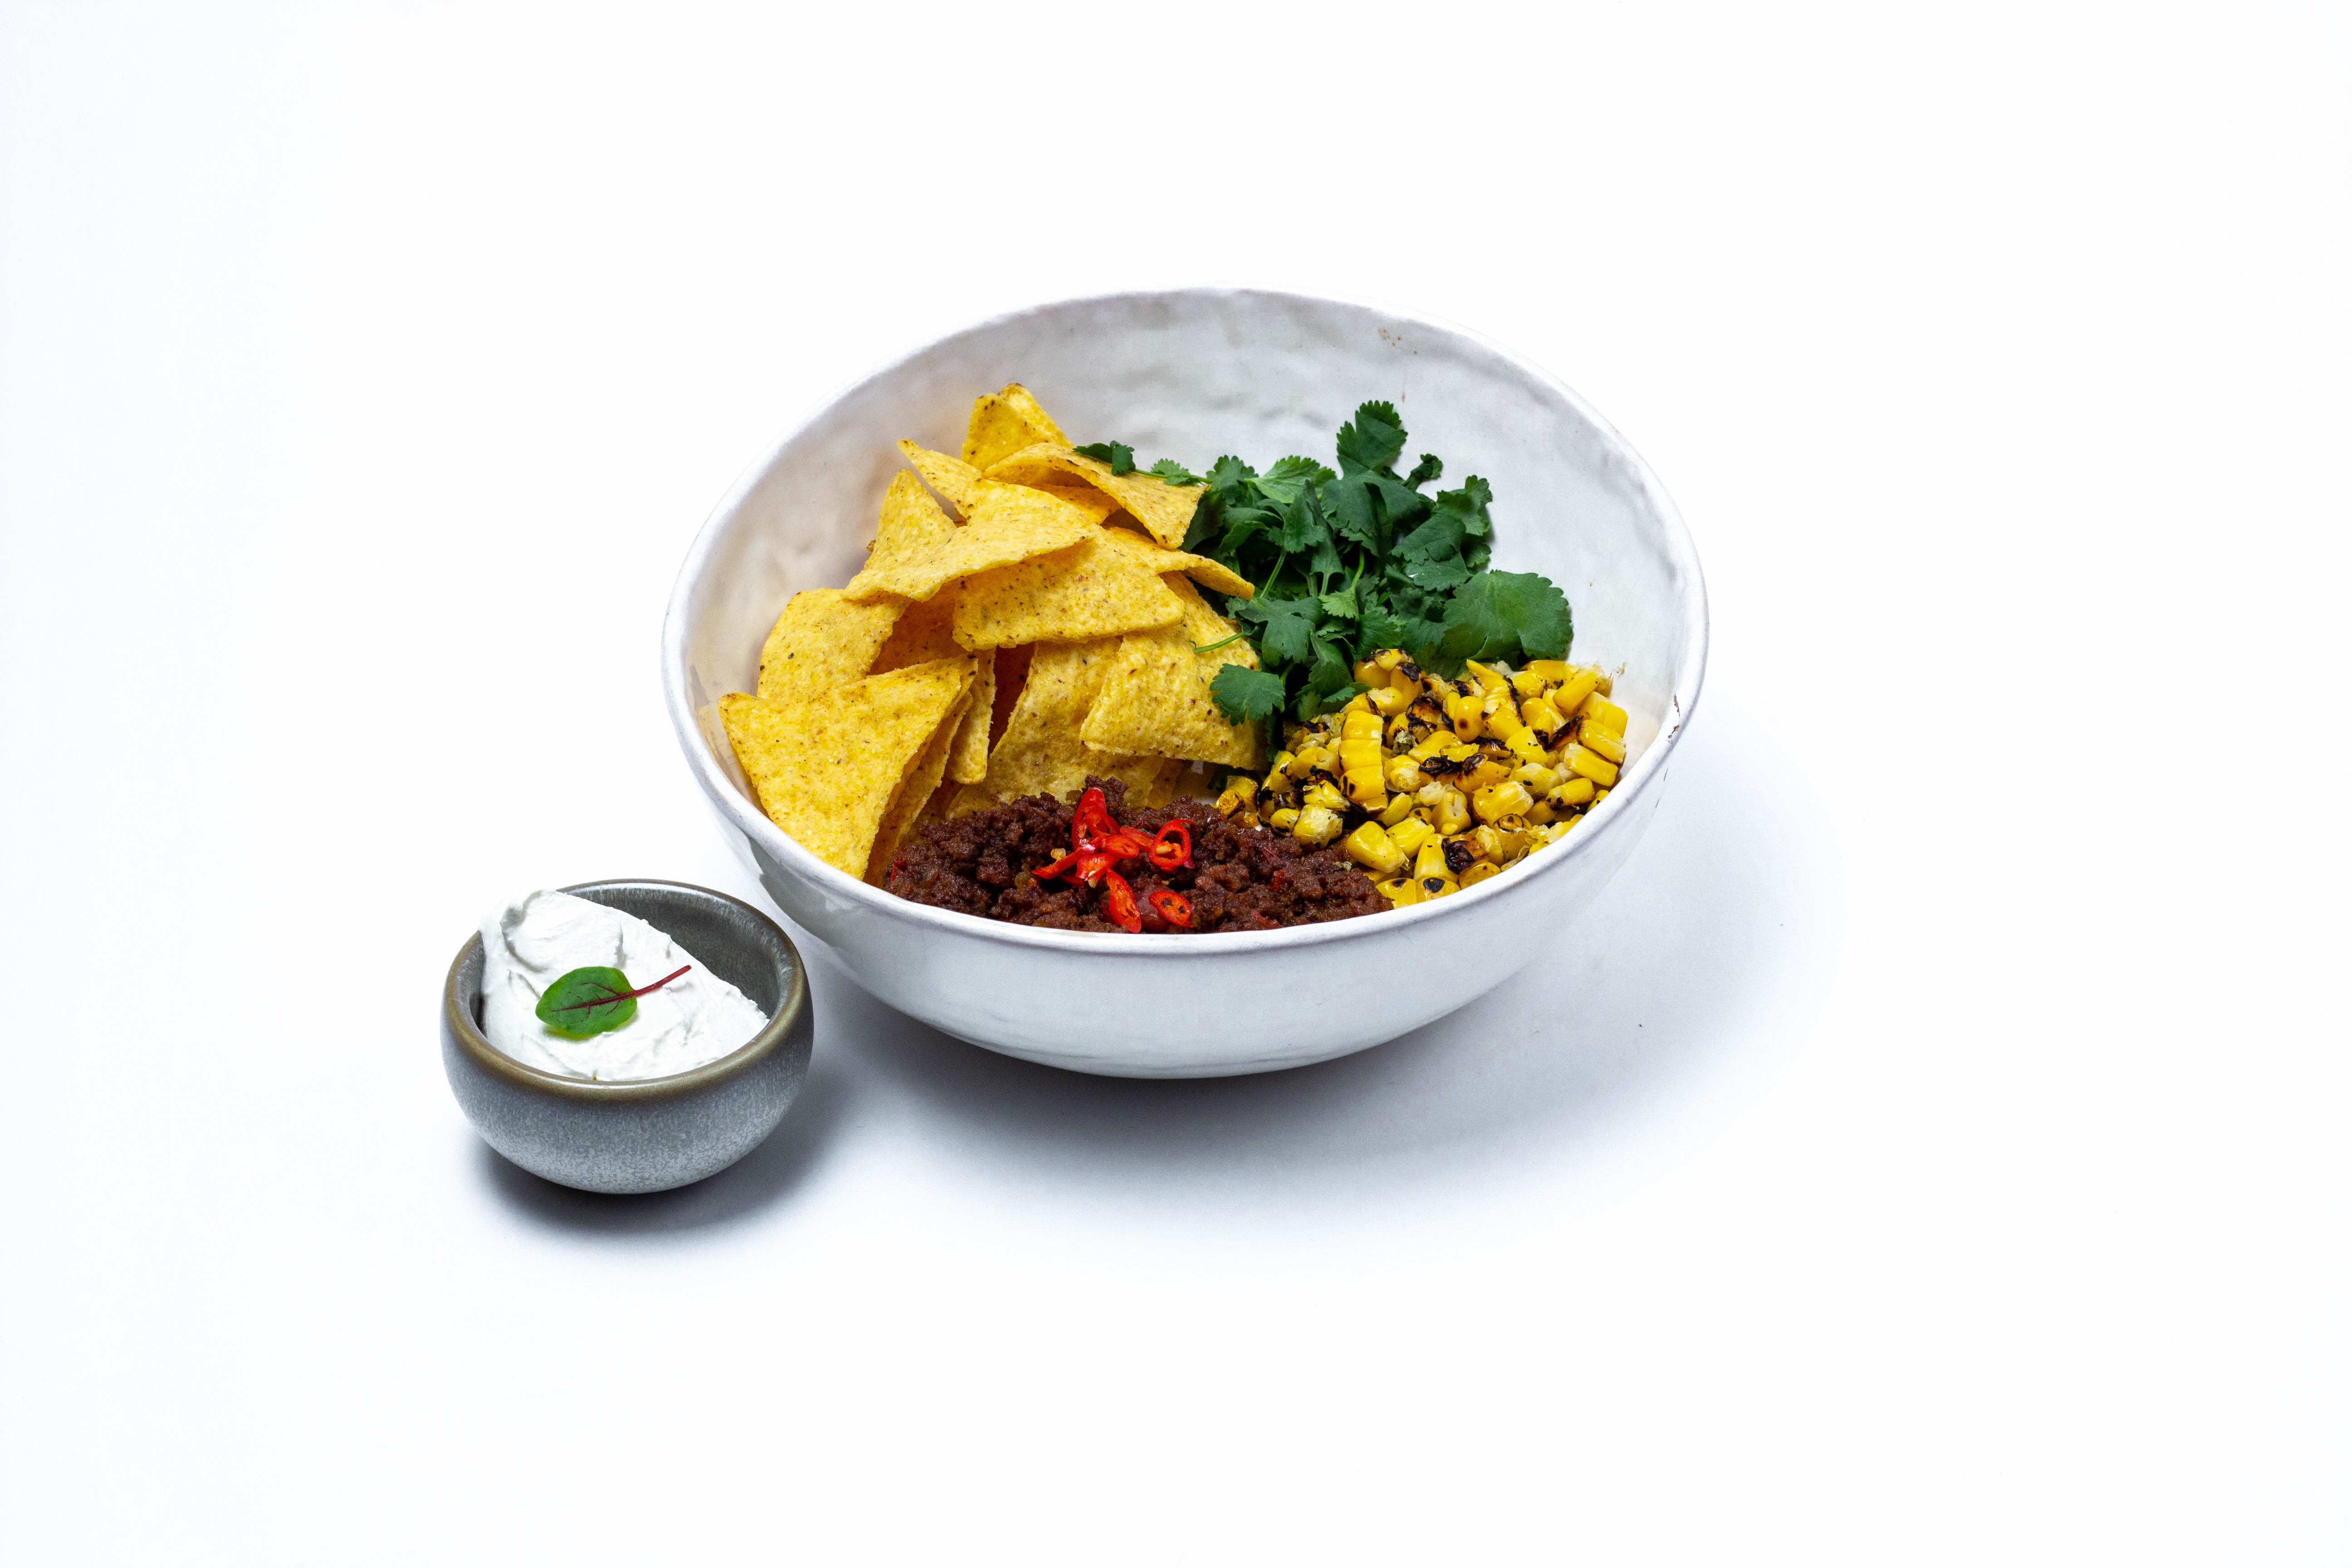 Chili con carne with beef and lamb, nachos, corn and sour cream